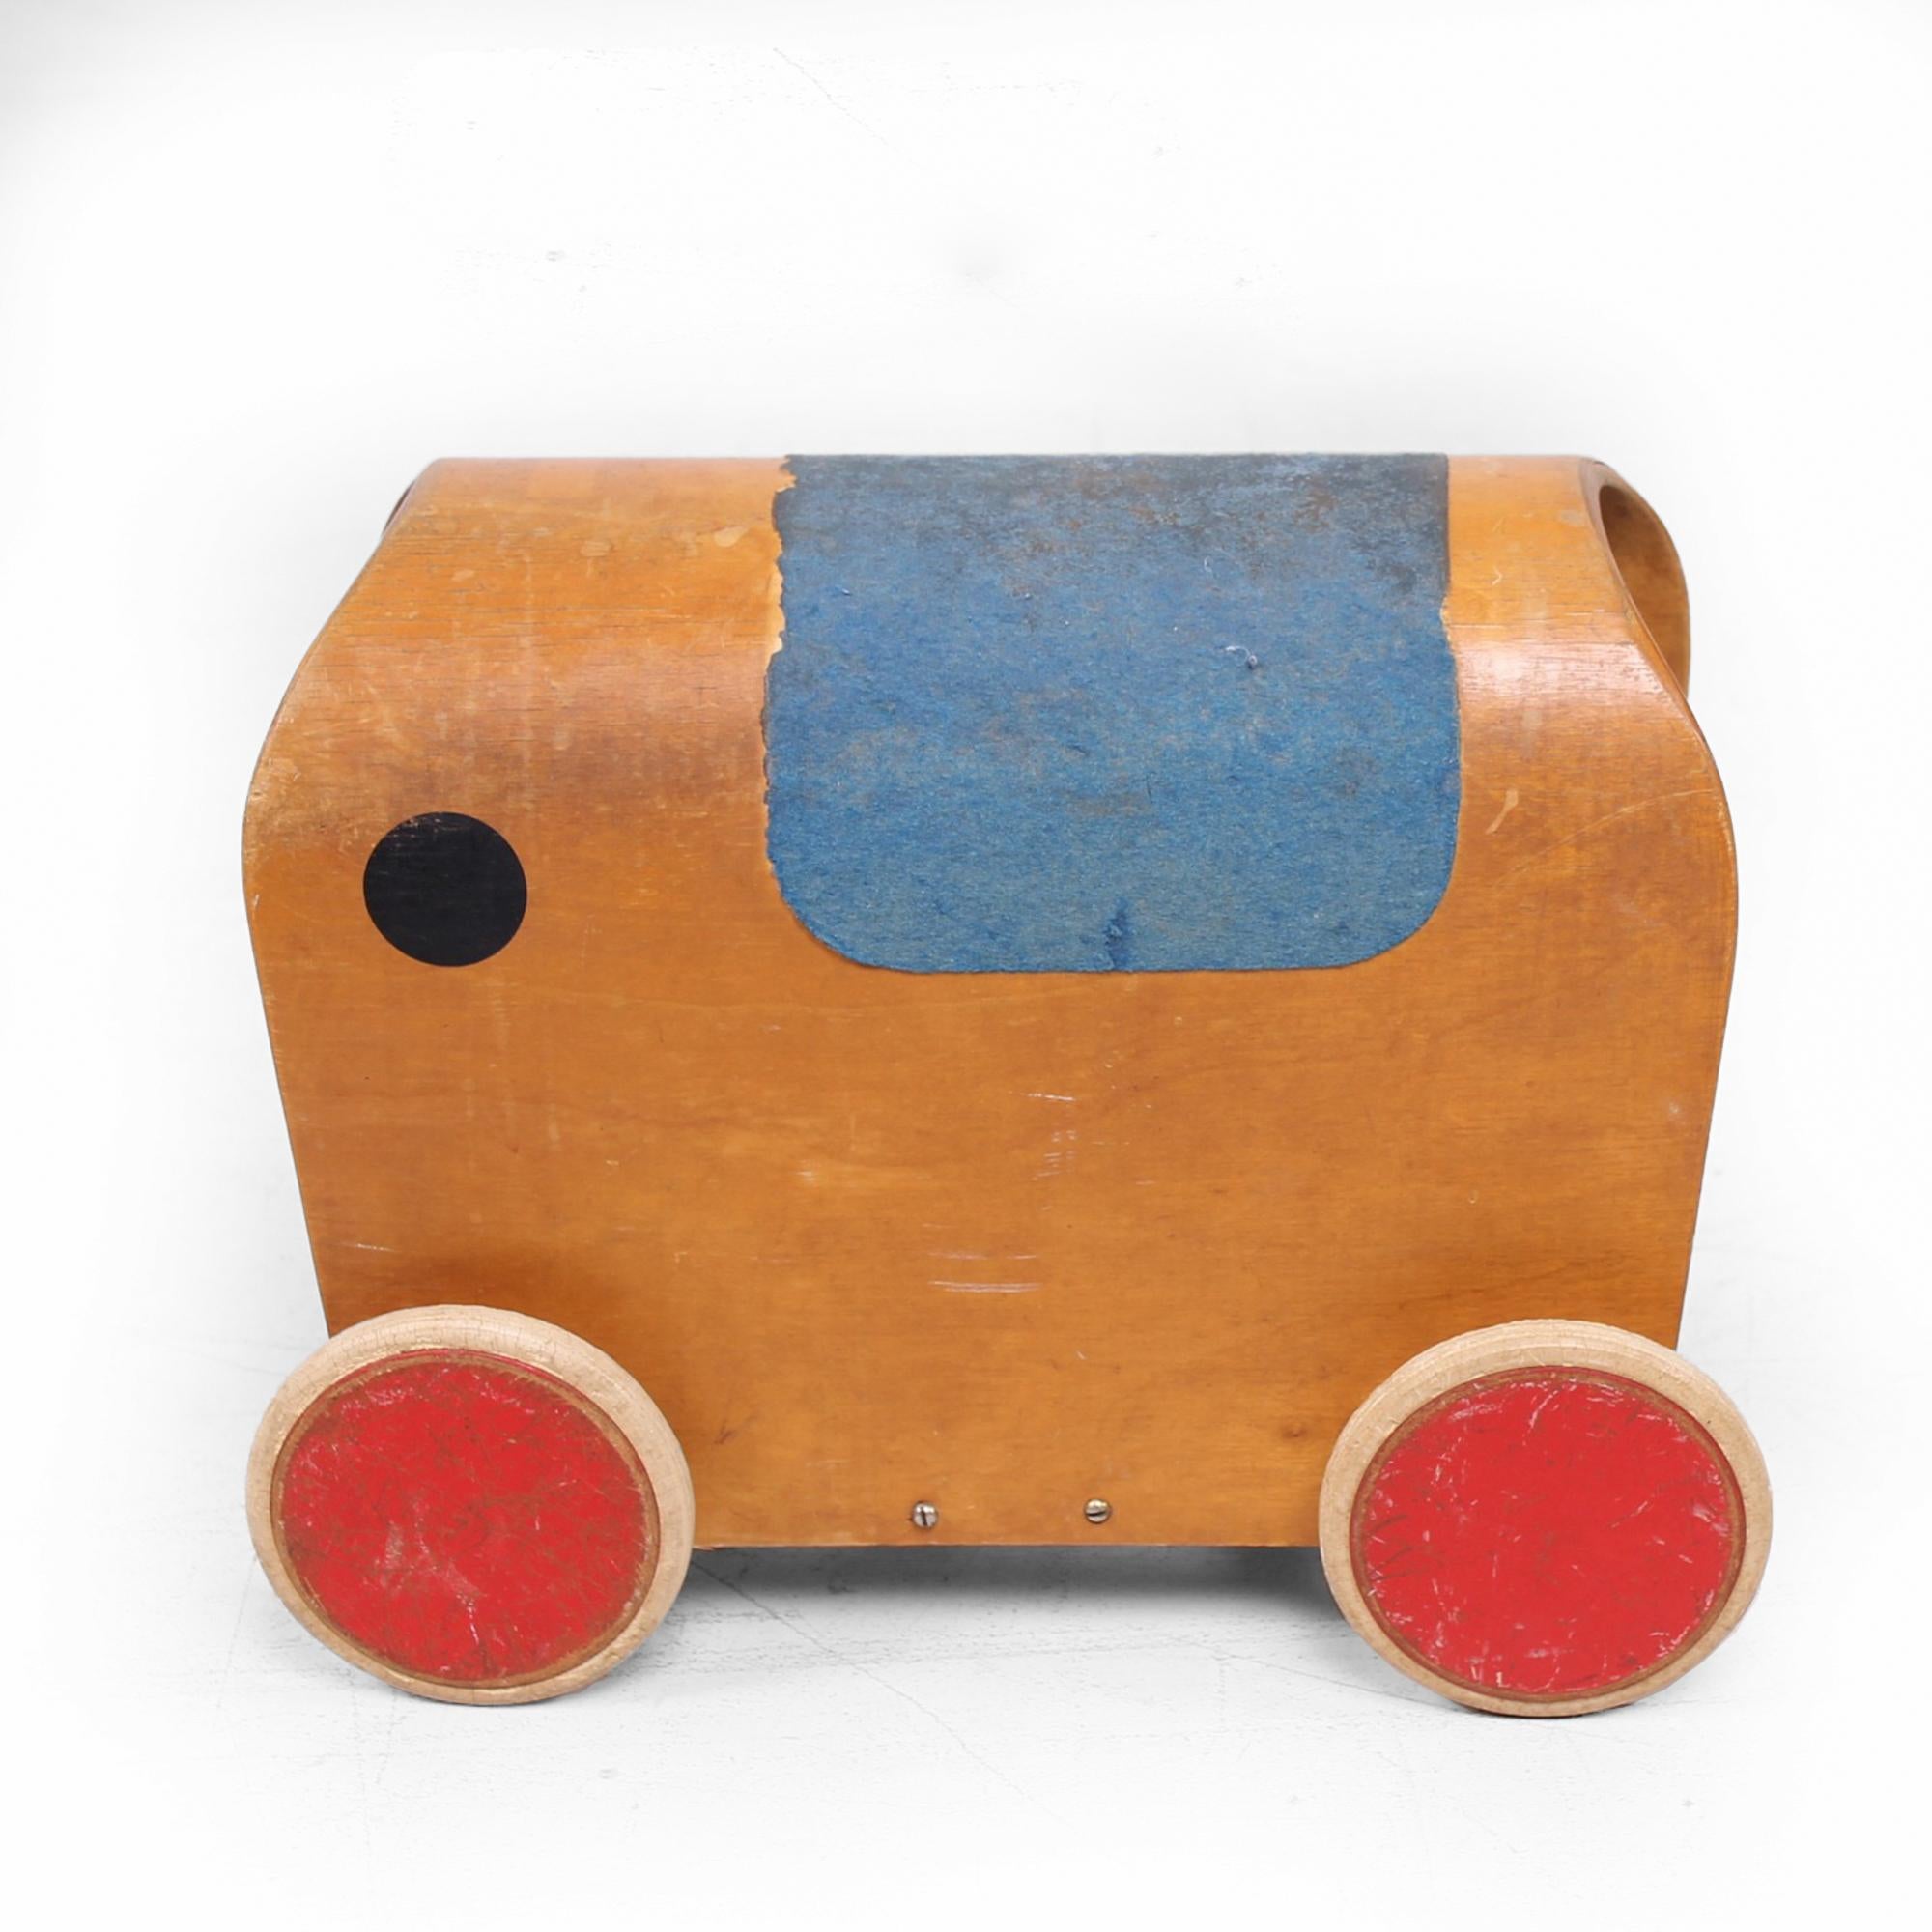 AMBIANIC presents
Wonderful vintage hand carved wood Toy Elephant shaped car by famed Swiss Master Toy Artist Antonio Vitali and modernist Kurt Naef. In the style of Hans Brockhage.
No label
13